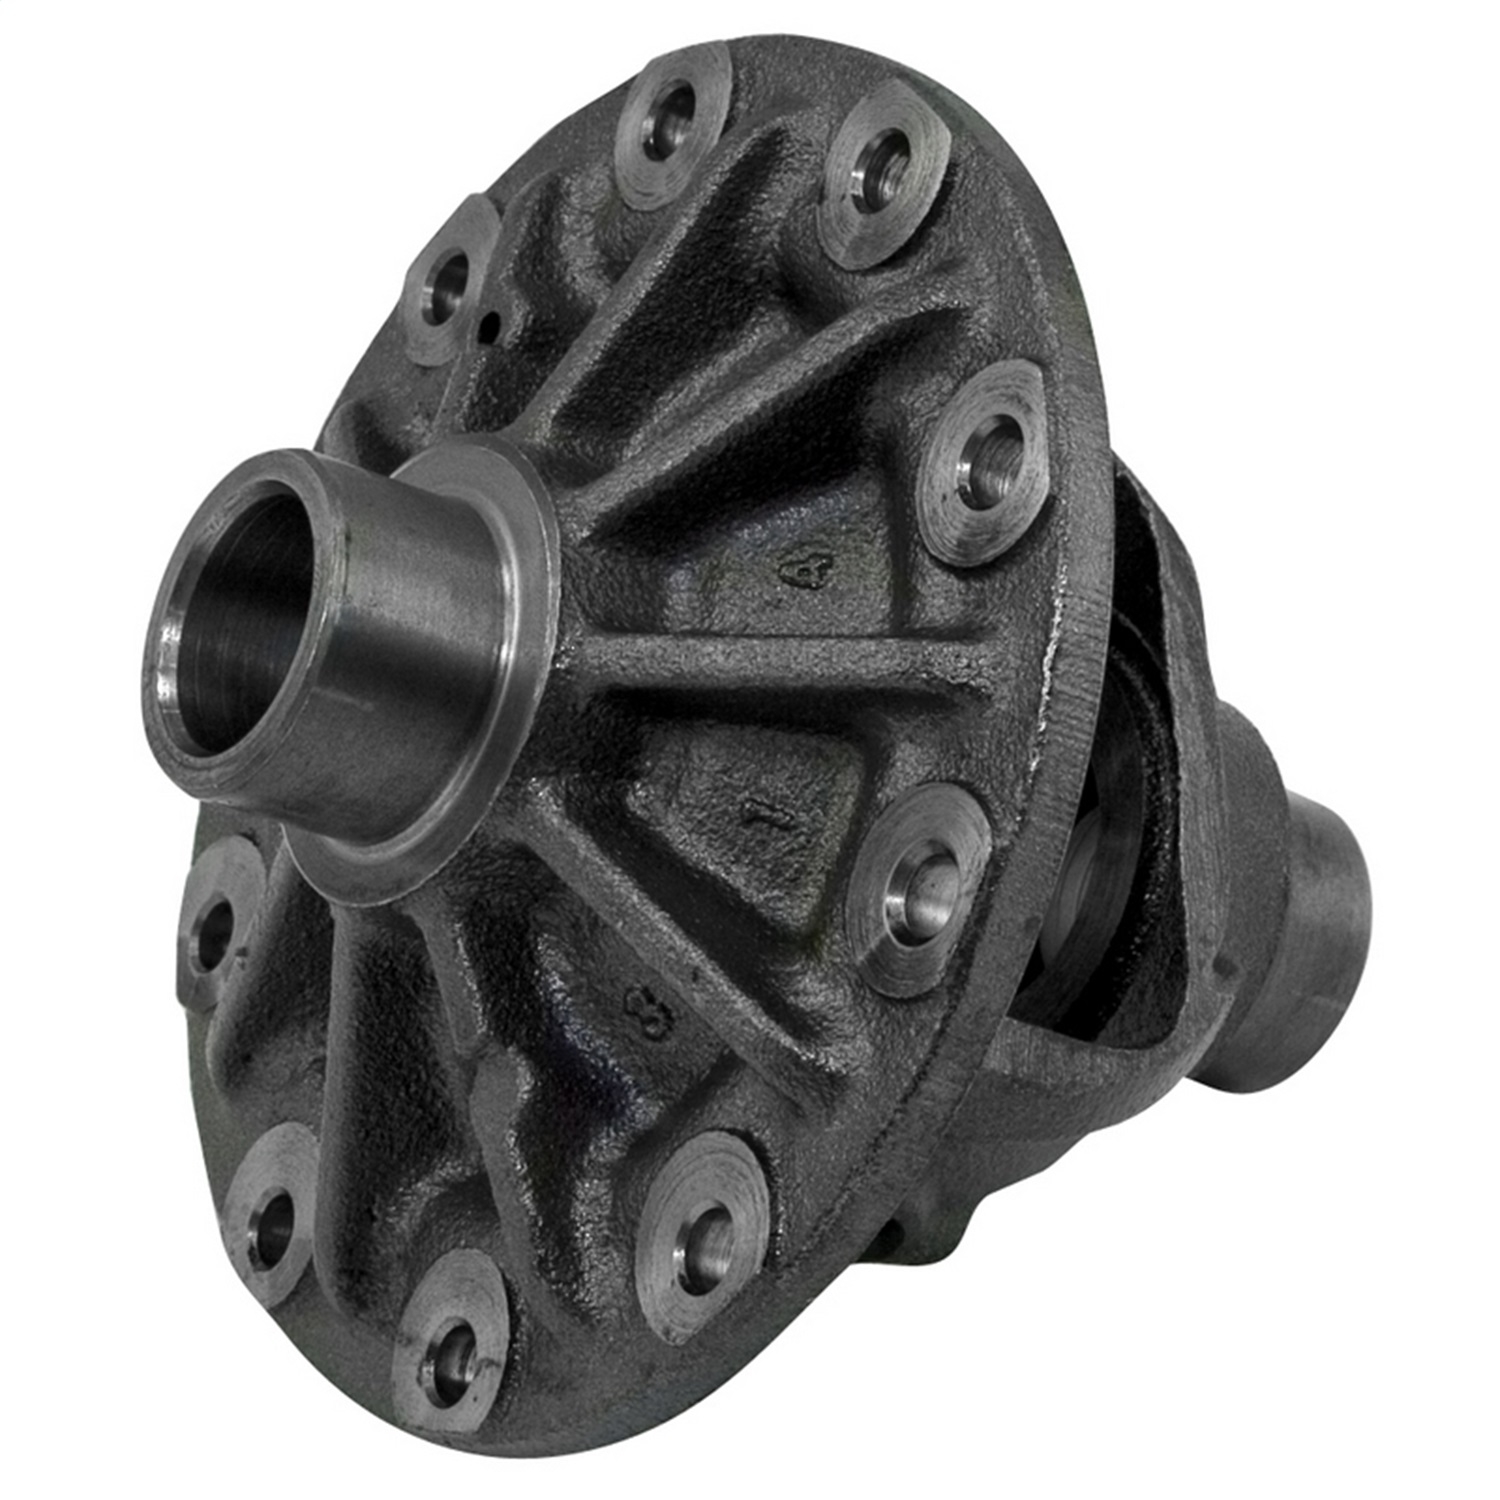 Omix This Rear Differential Carrier From Omix Is For Dana 44 72-75 Jeep Cj5, 72-75 Cj6, And 1986